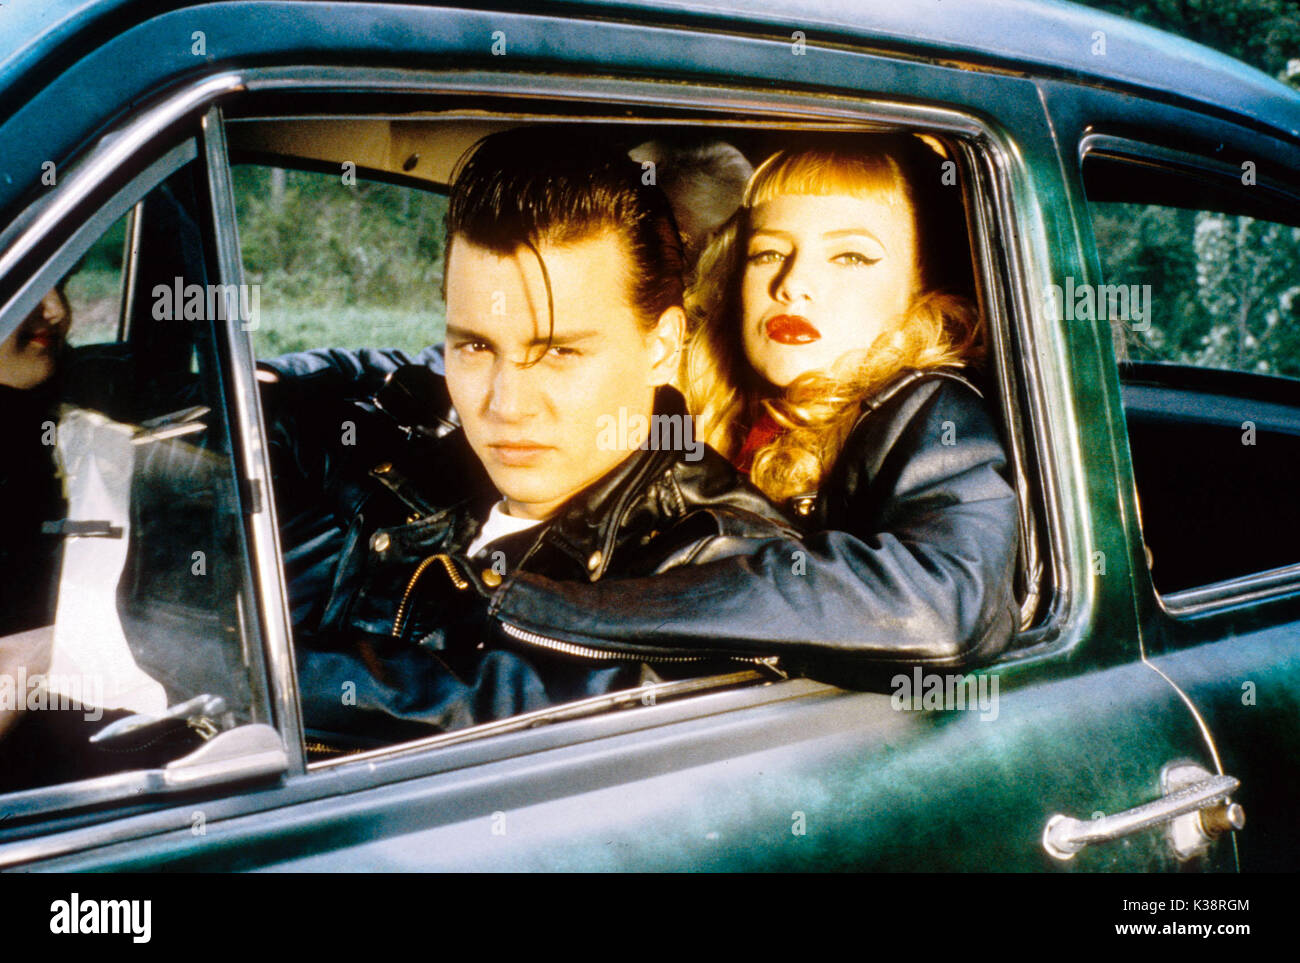 CRY-BABY JOHNNY DEPP, TRACI LORDS     Date: 1990 Stock Photo